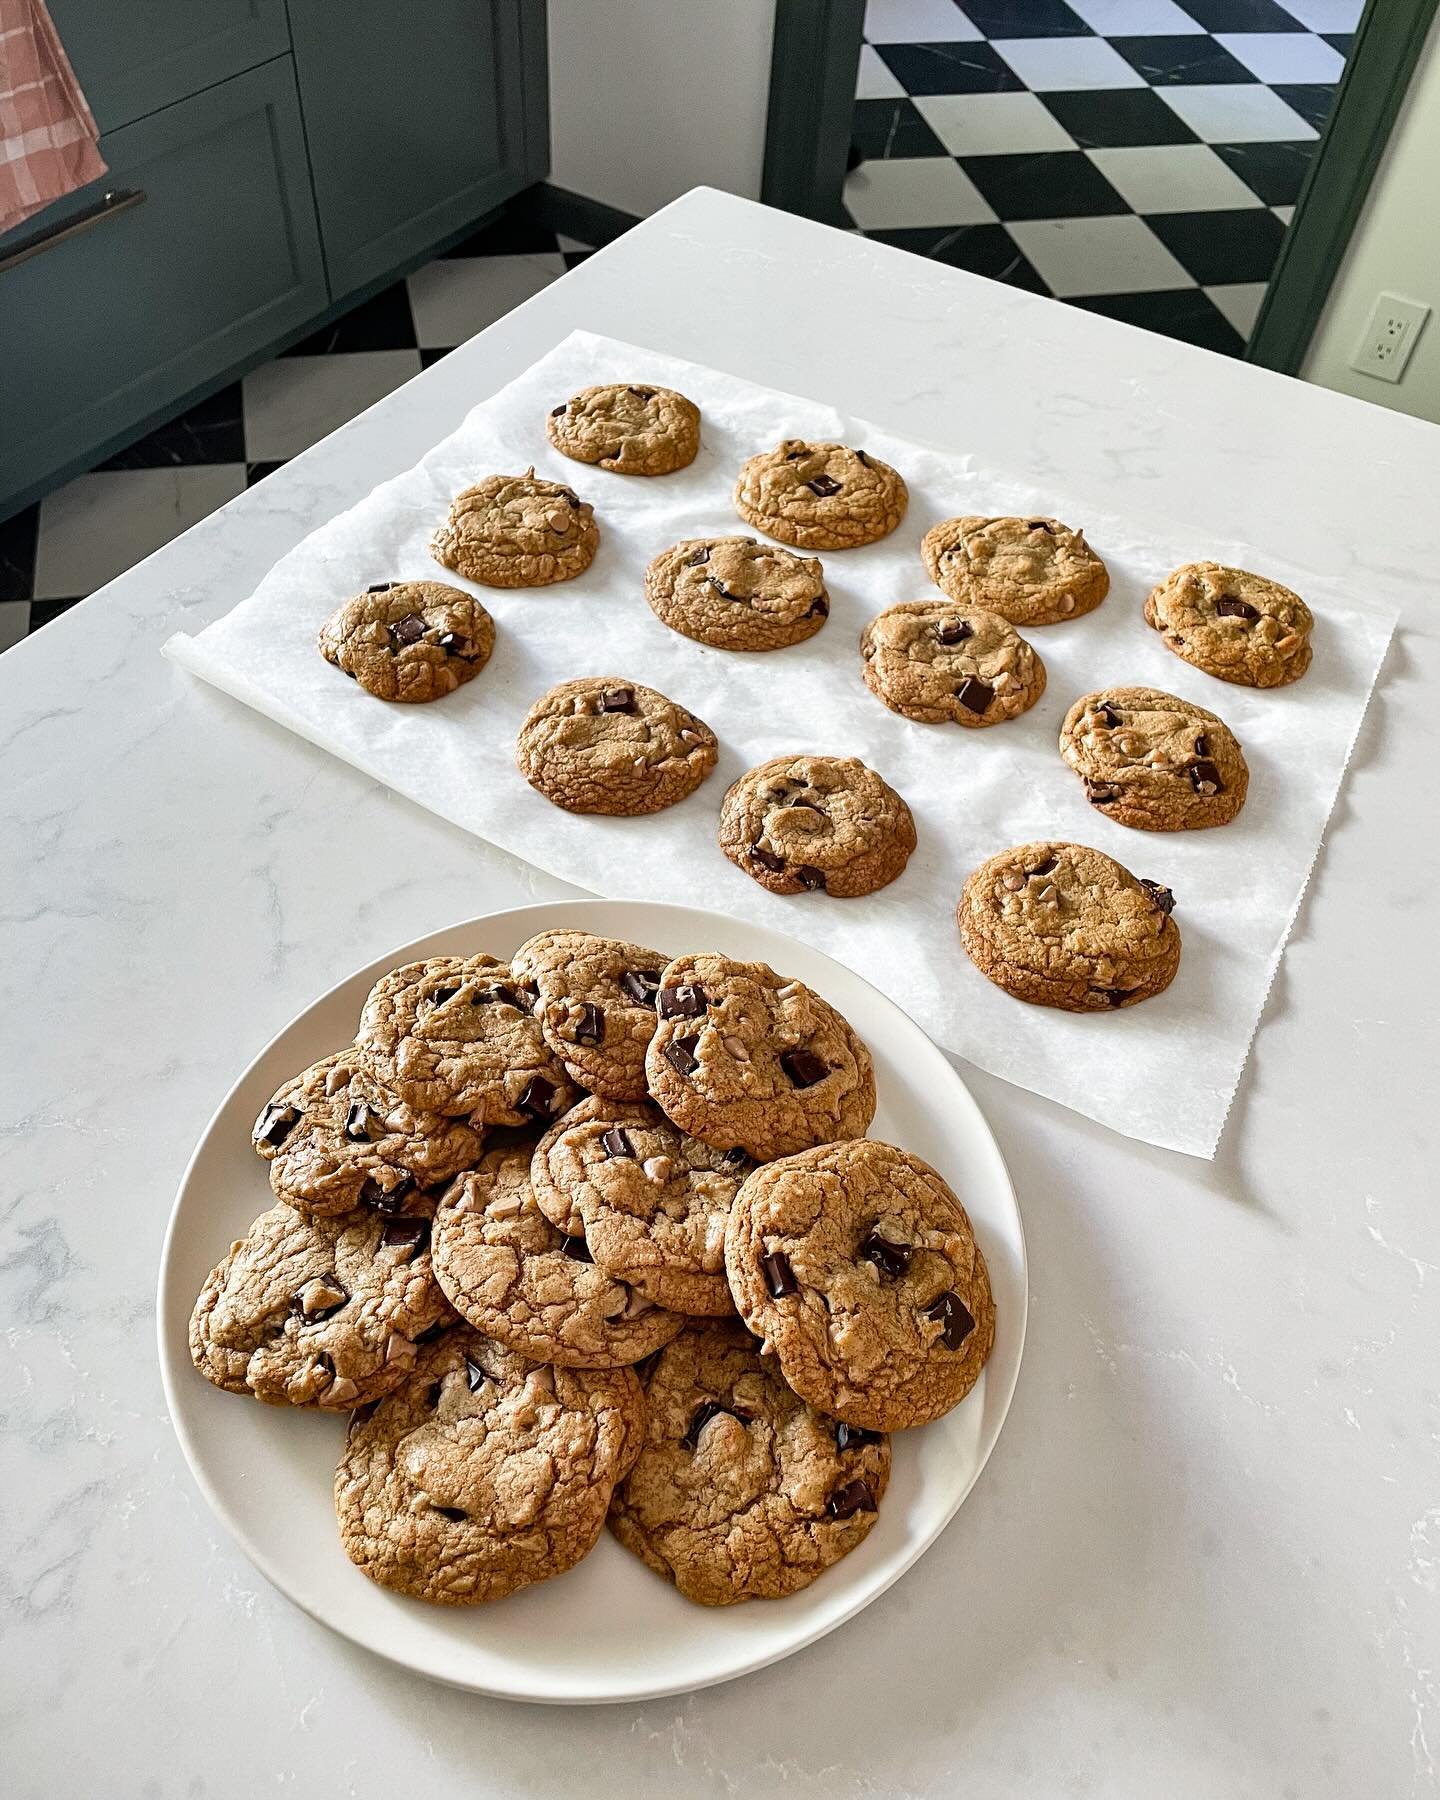 If you invite me over and ask me to bring a dessert, it&rsquo;s probably going to be my own recipe for browned butter chocolate chip cookies 🍪 

It occurred to me after we redid the kitchen that I could just brown the butter right in my stainless mi